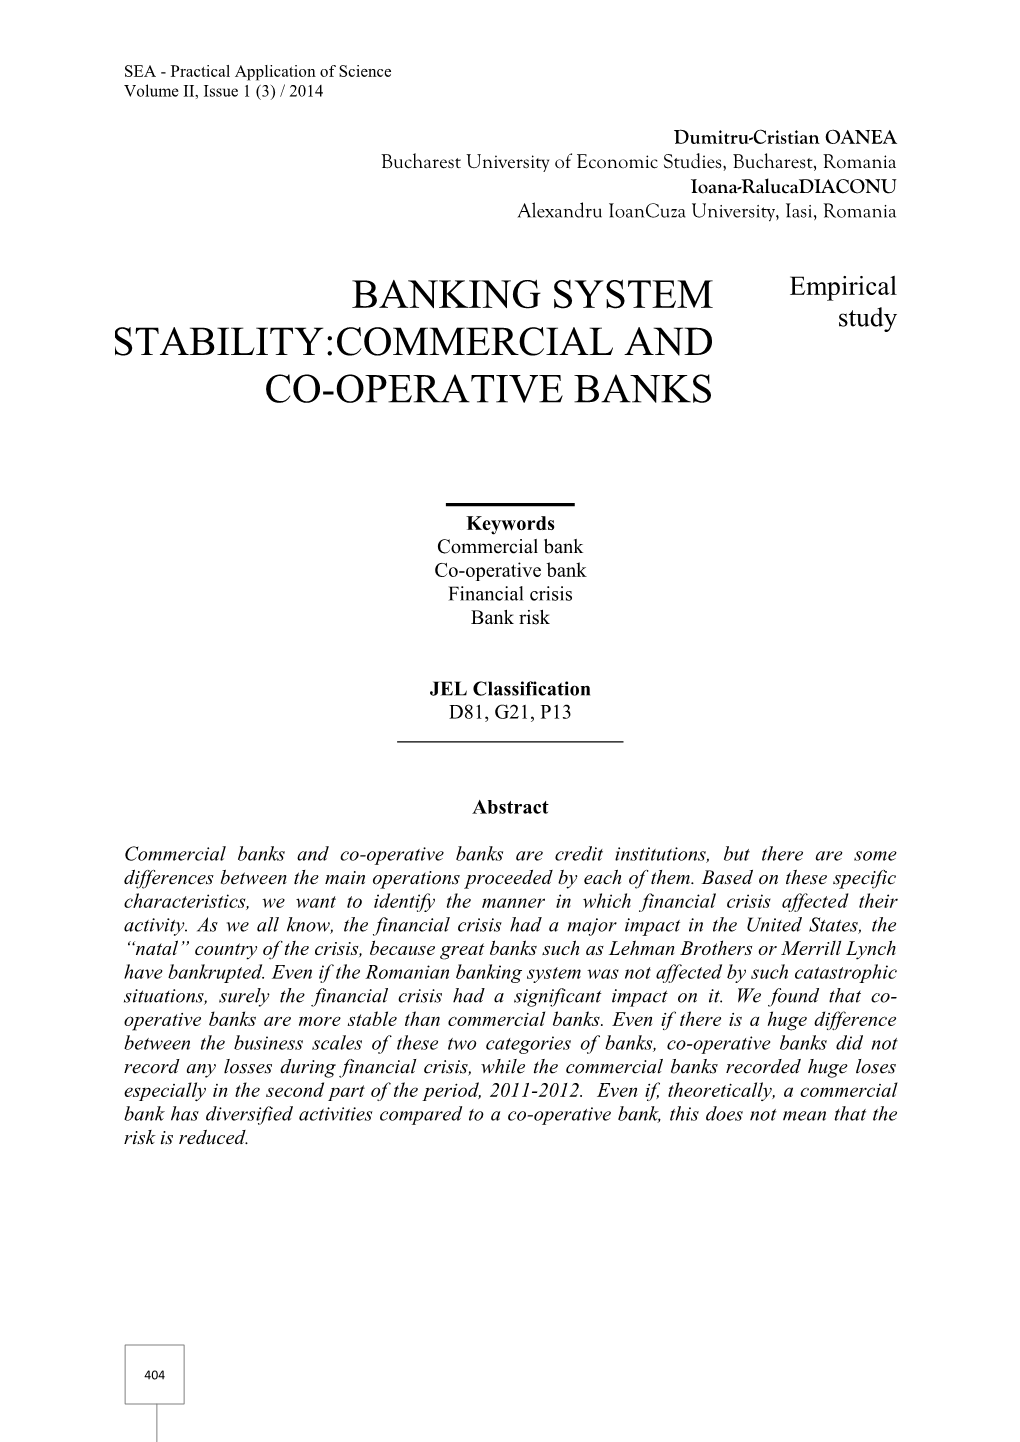 Banking System Stability:Commercial and Co